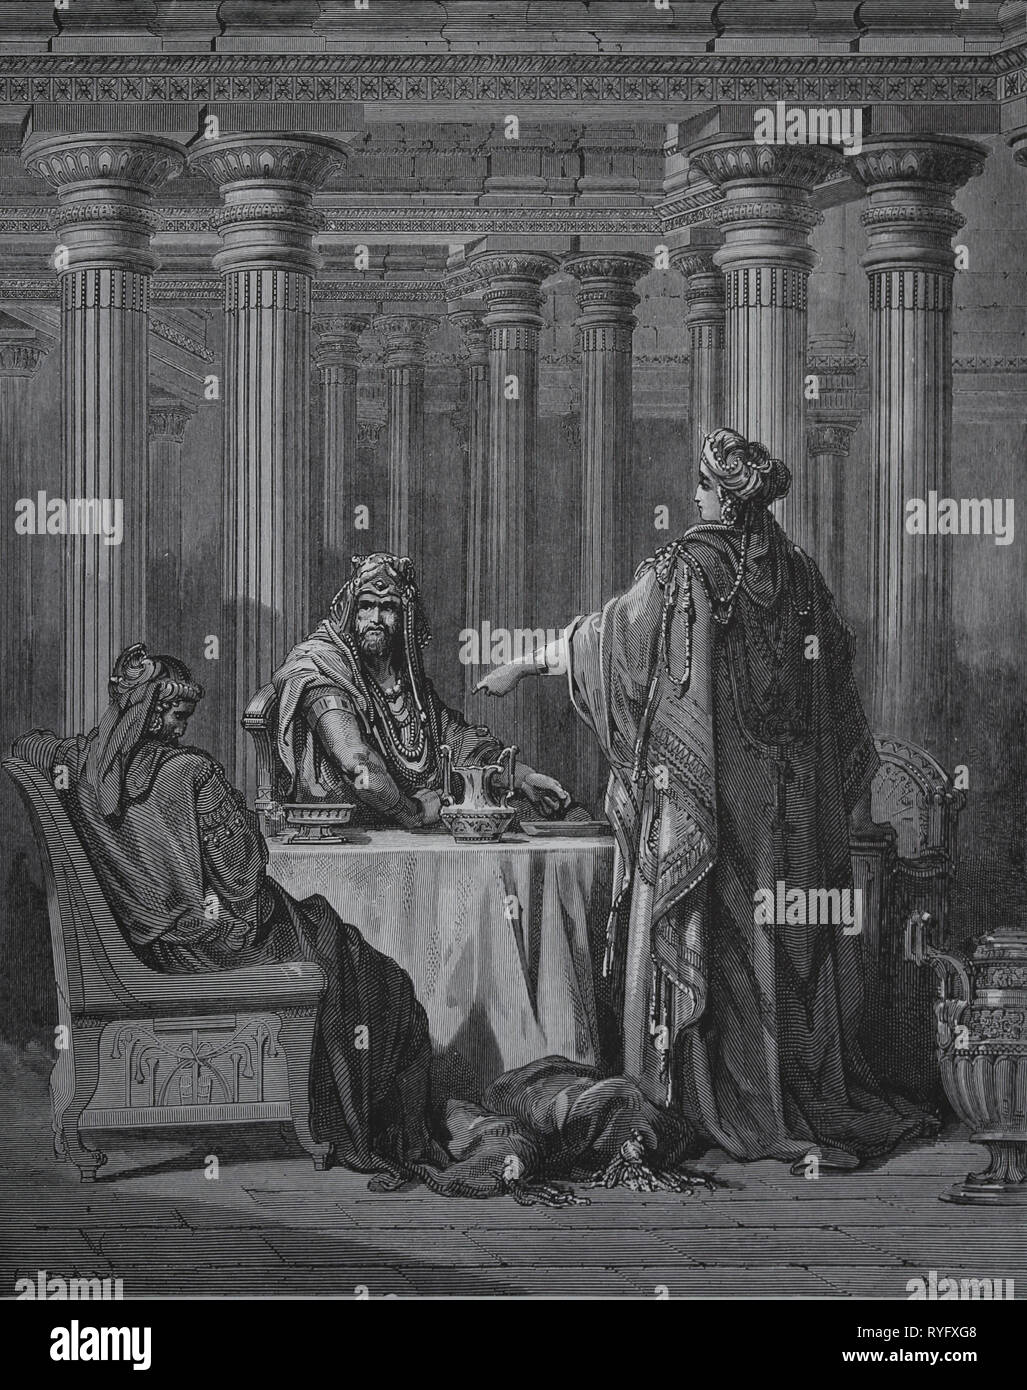 The Bible. Book of Esther. Esther accuses Haman. Engraving by Gustave Dore, 1866. Stock Photo